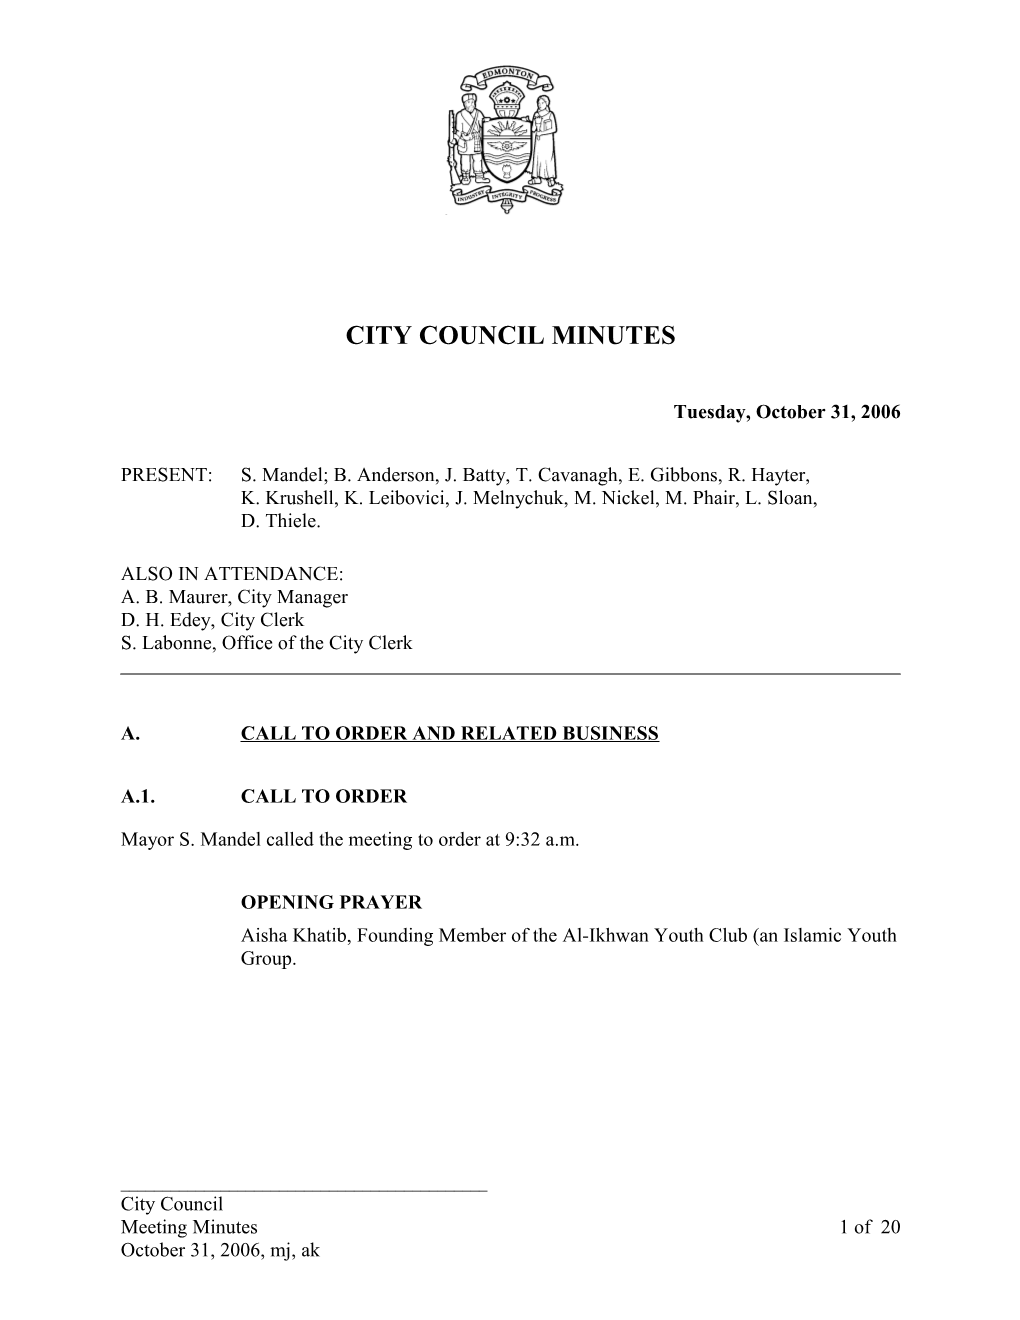 Minutes for City Council October 31, 2006 Meeting